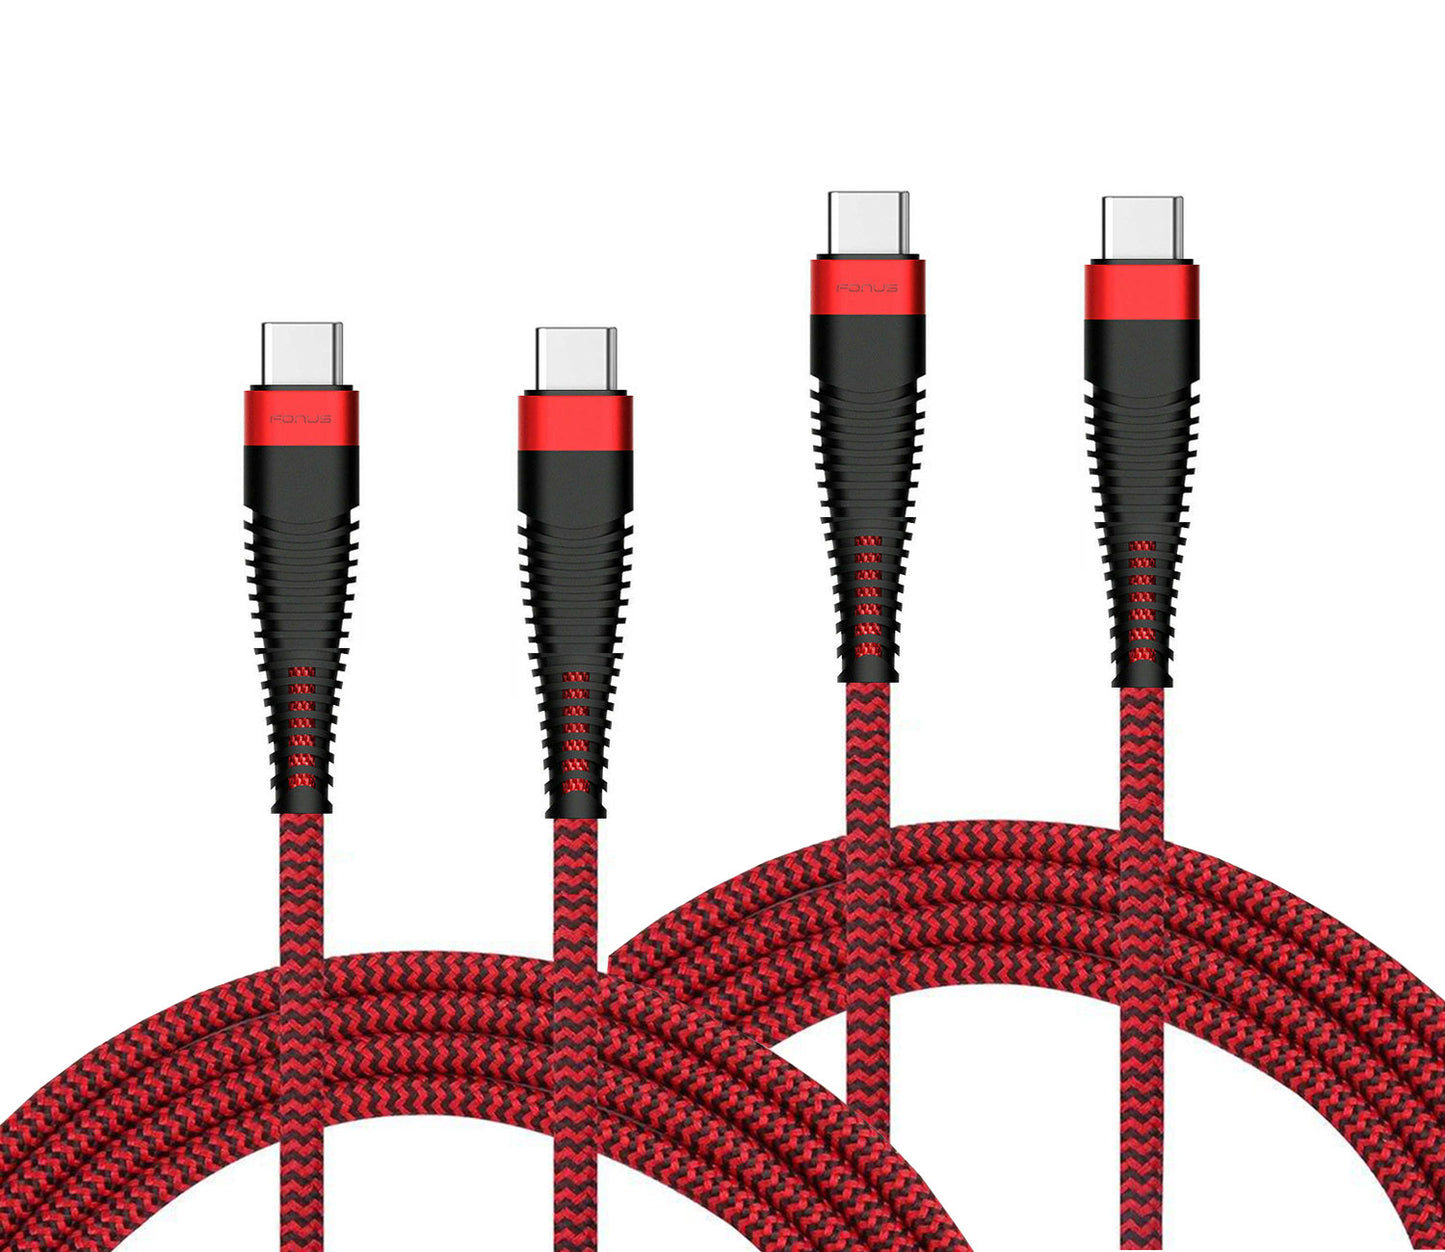 6ft and 10ft Long PD USB-C Cables Fast Charge TYPE-C to TYPE-C Cord Power Wire USB-C to USB-C Data Sync - ONY69